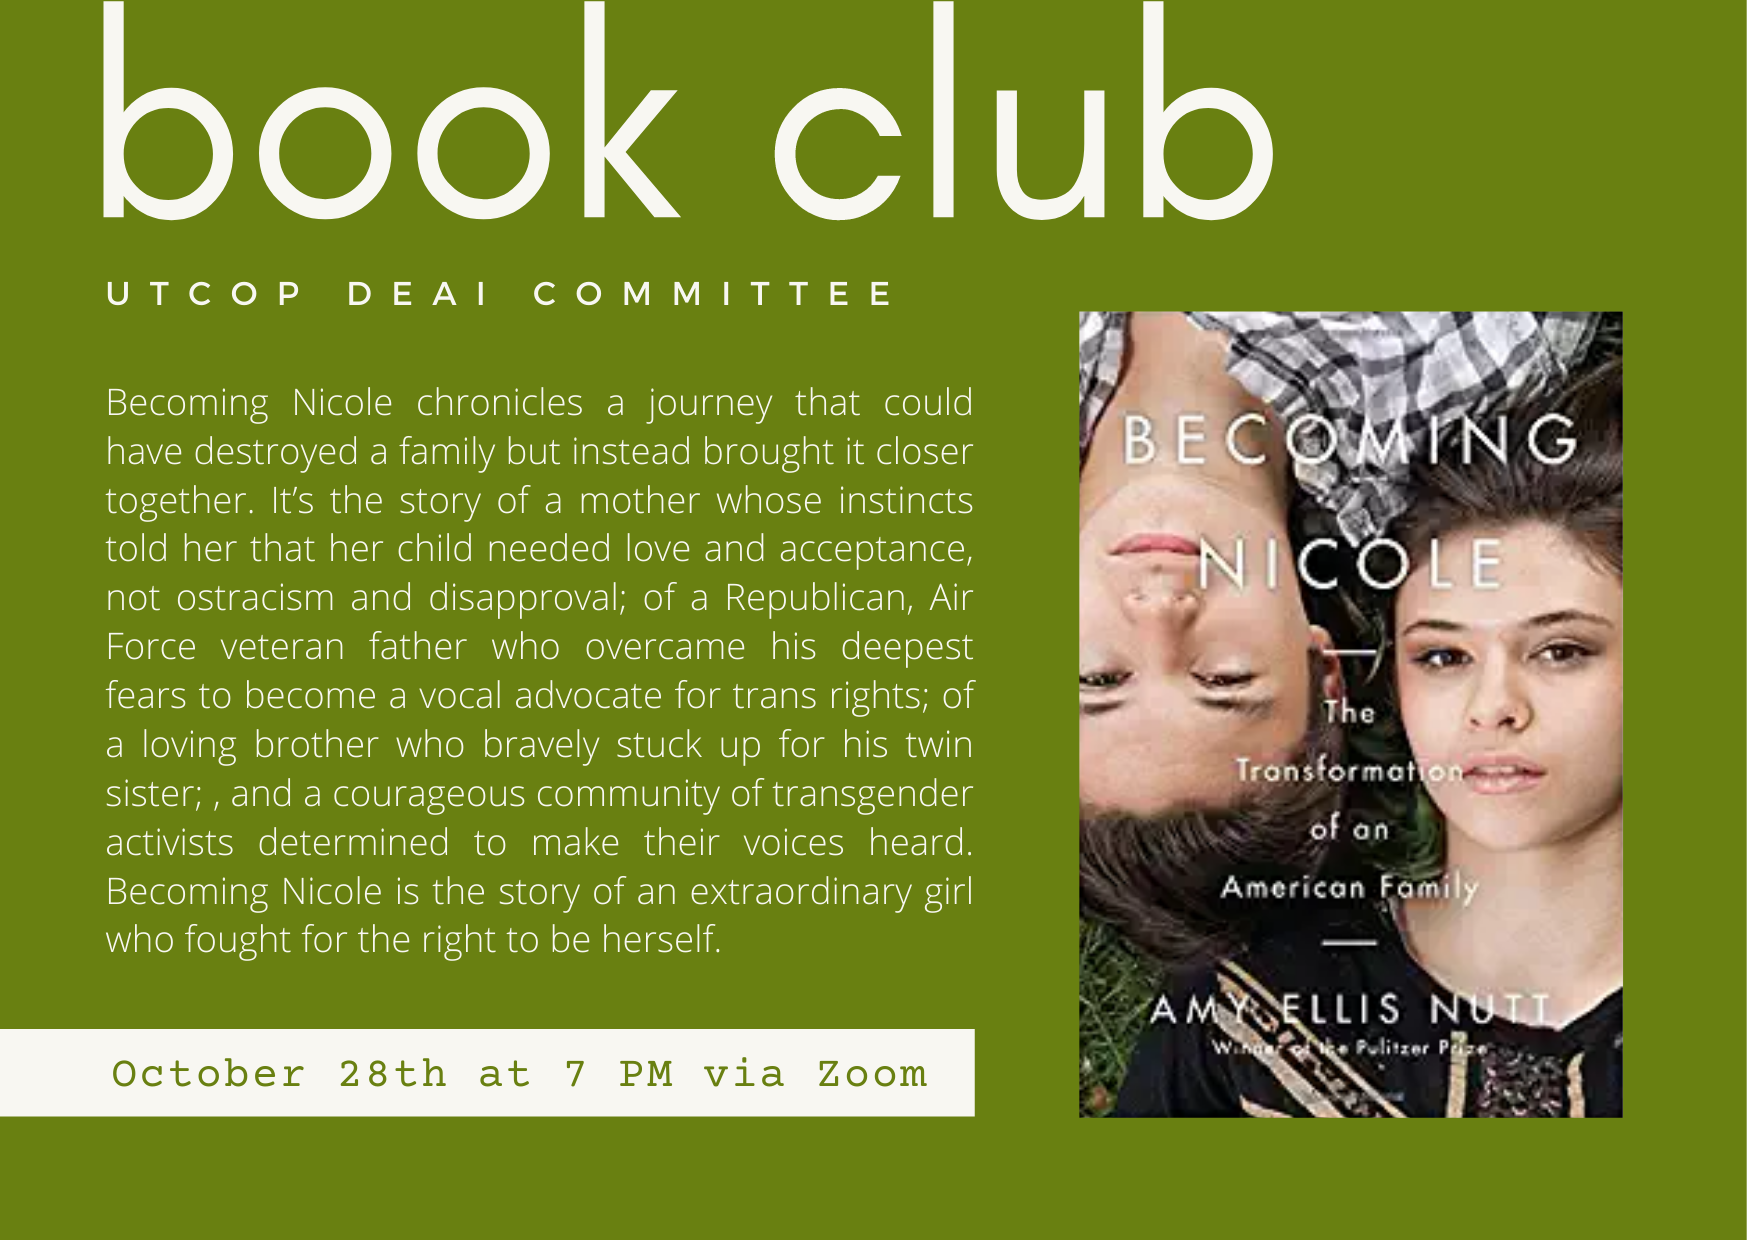 Global Social Club Book Club flyer for October 2021 - Becoming Nicole by Amy Ellis Nutt